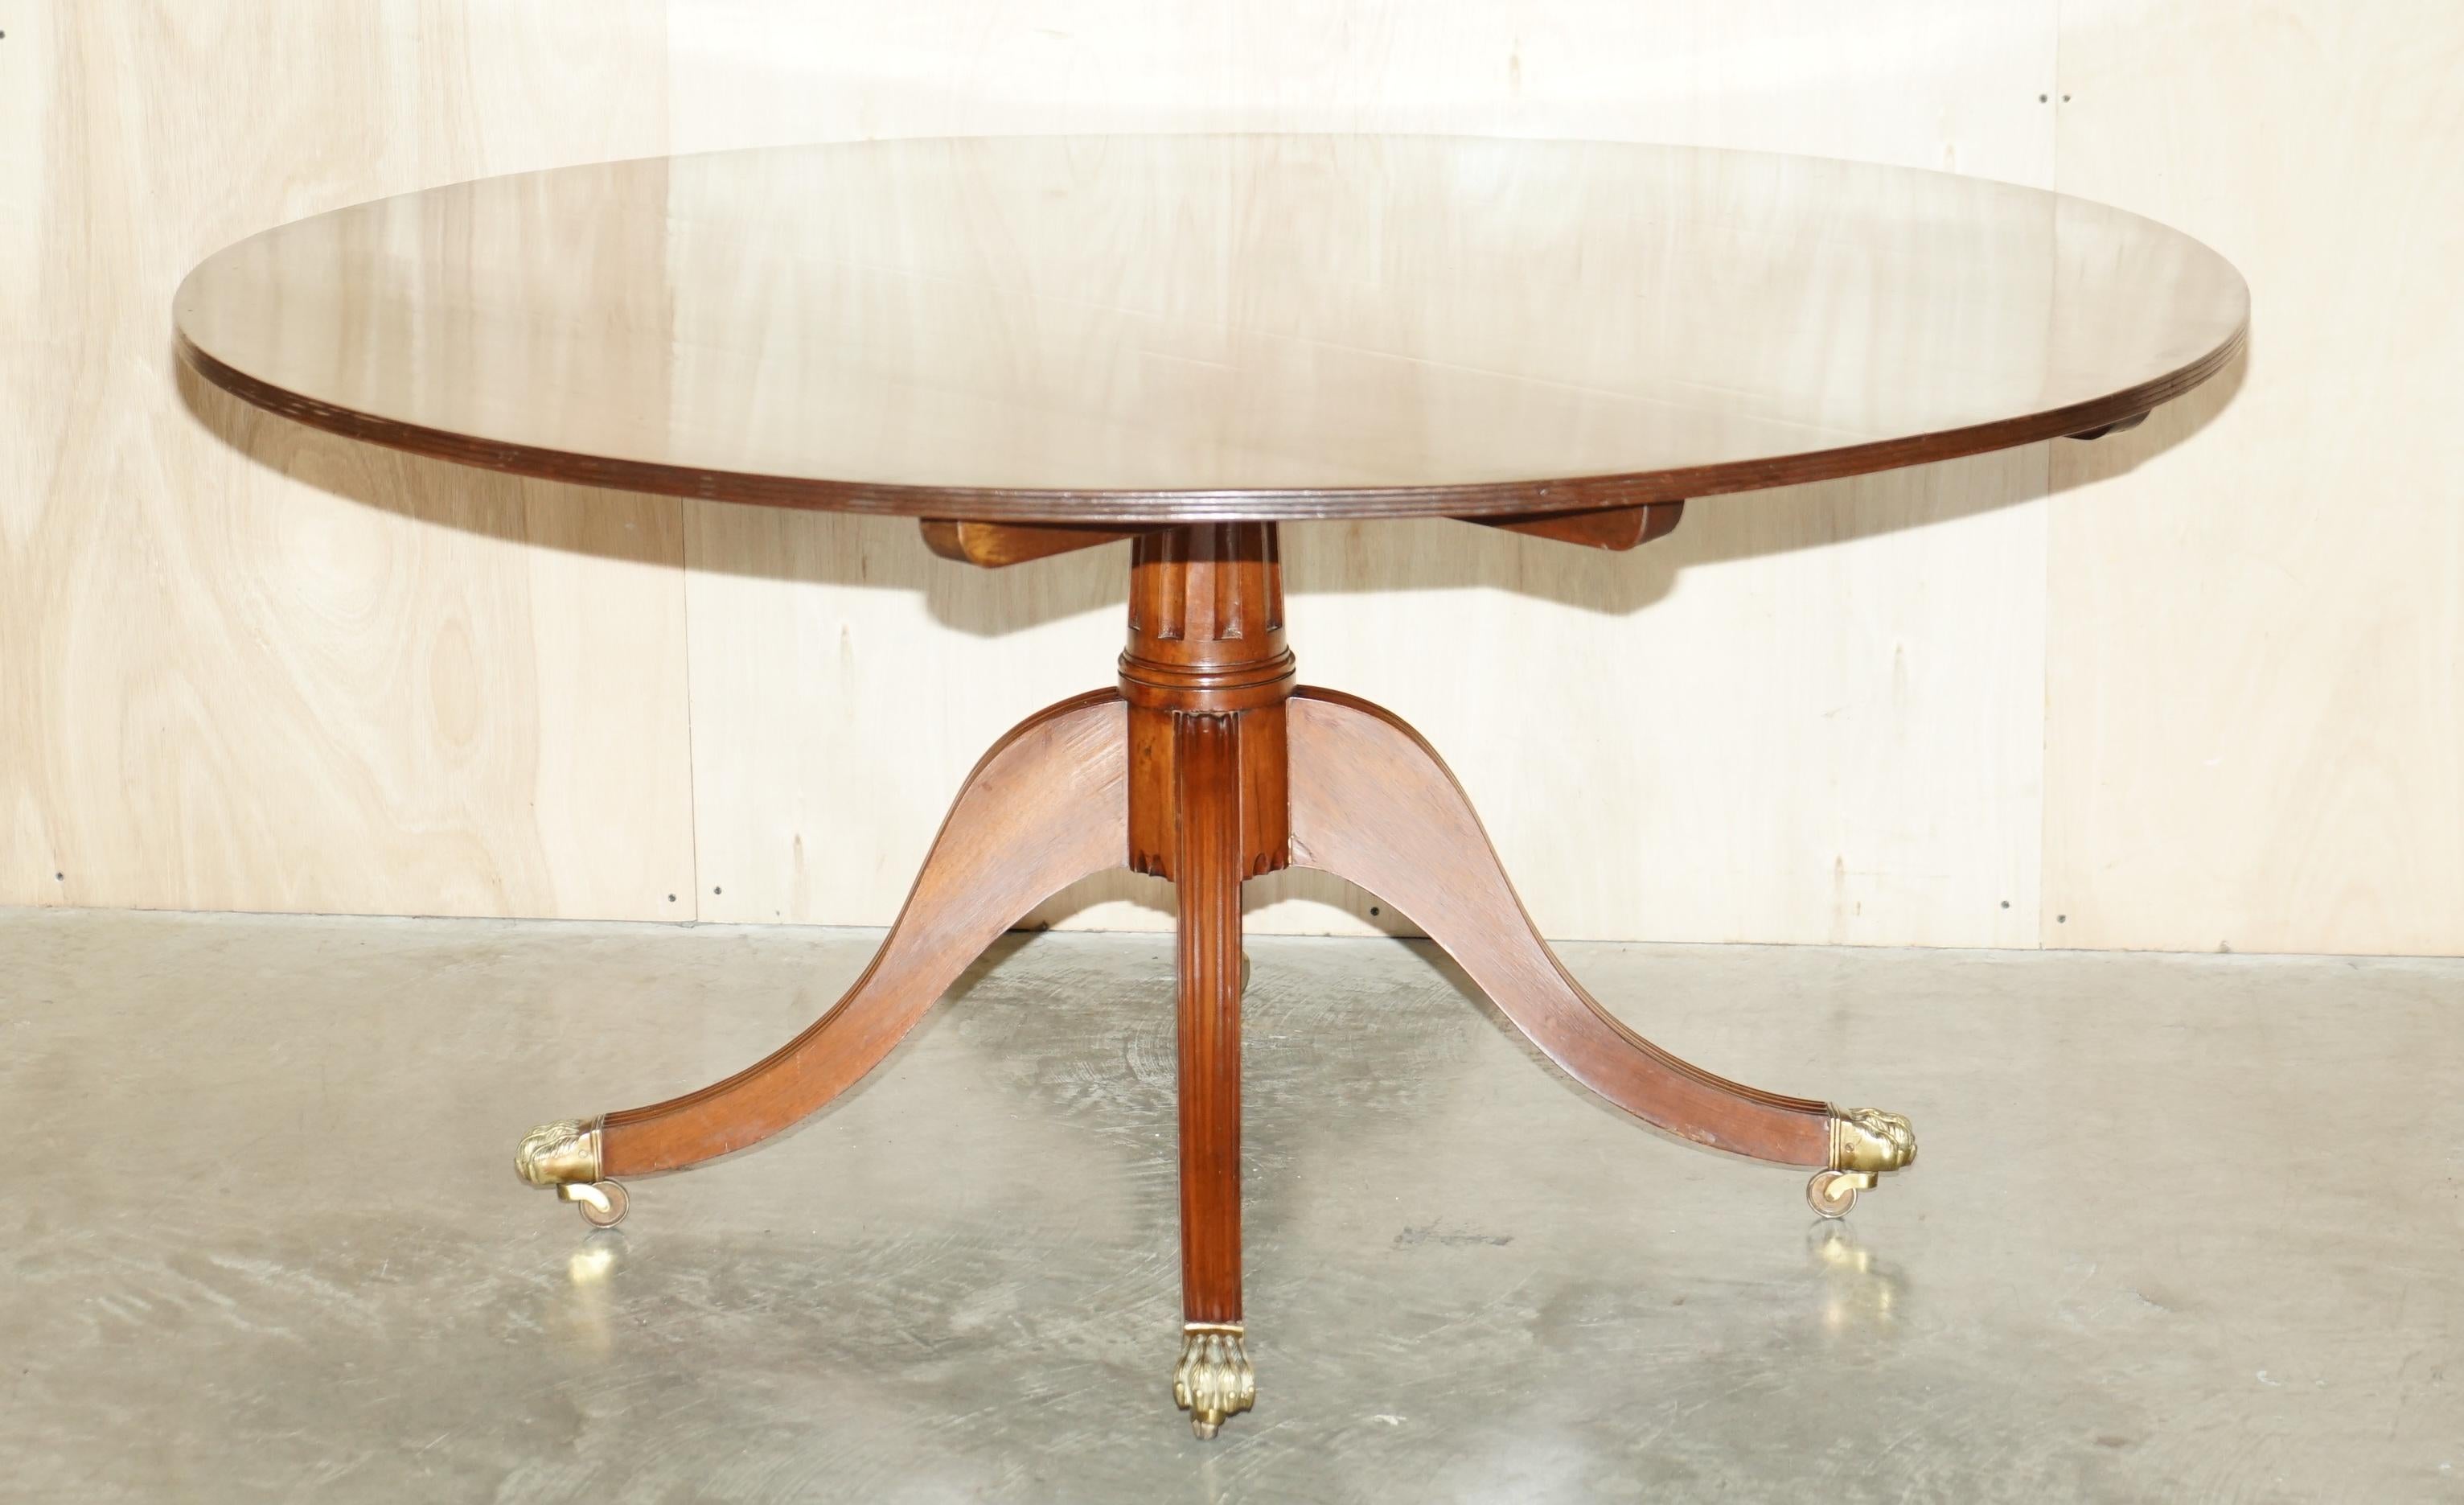 We are delighted to offer for sale this lovely late Victorian mahogany tilt top dining table with solid English brass Lion’s Paw castors

A good looking and well made table, ideally suited as a 4-6 person dining table or as a large occasional /